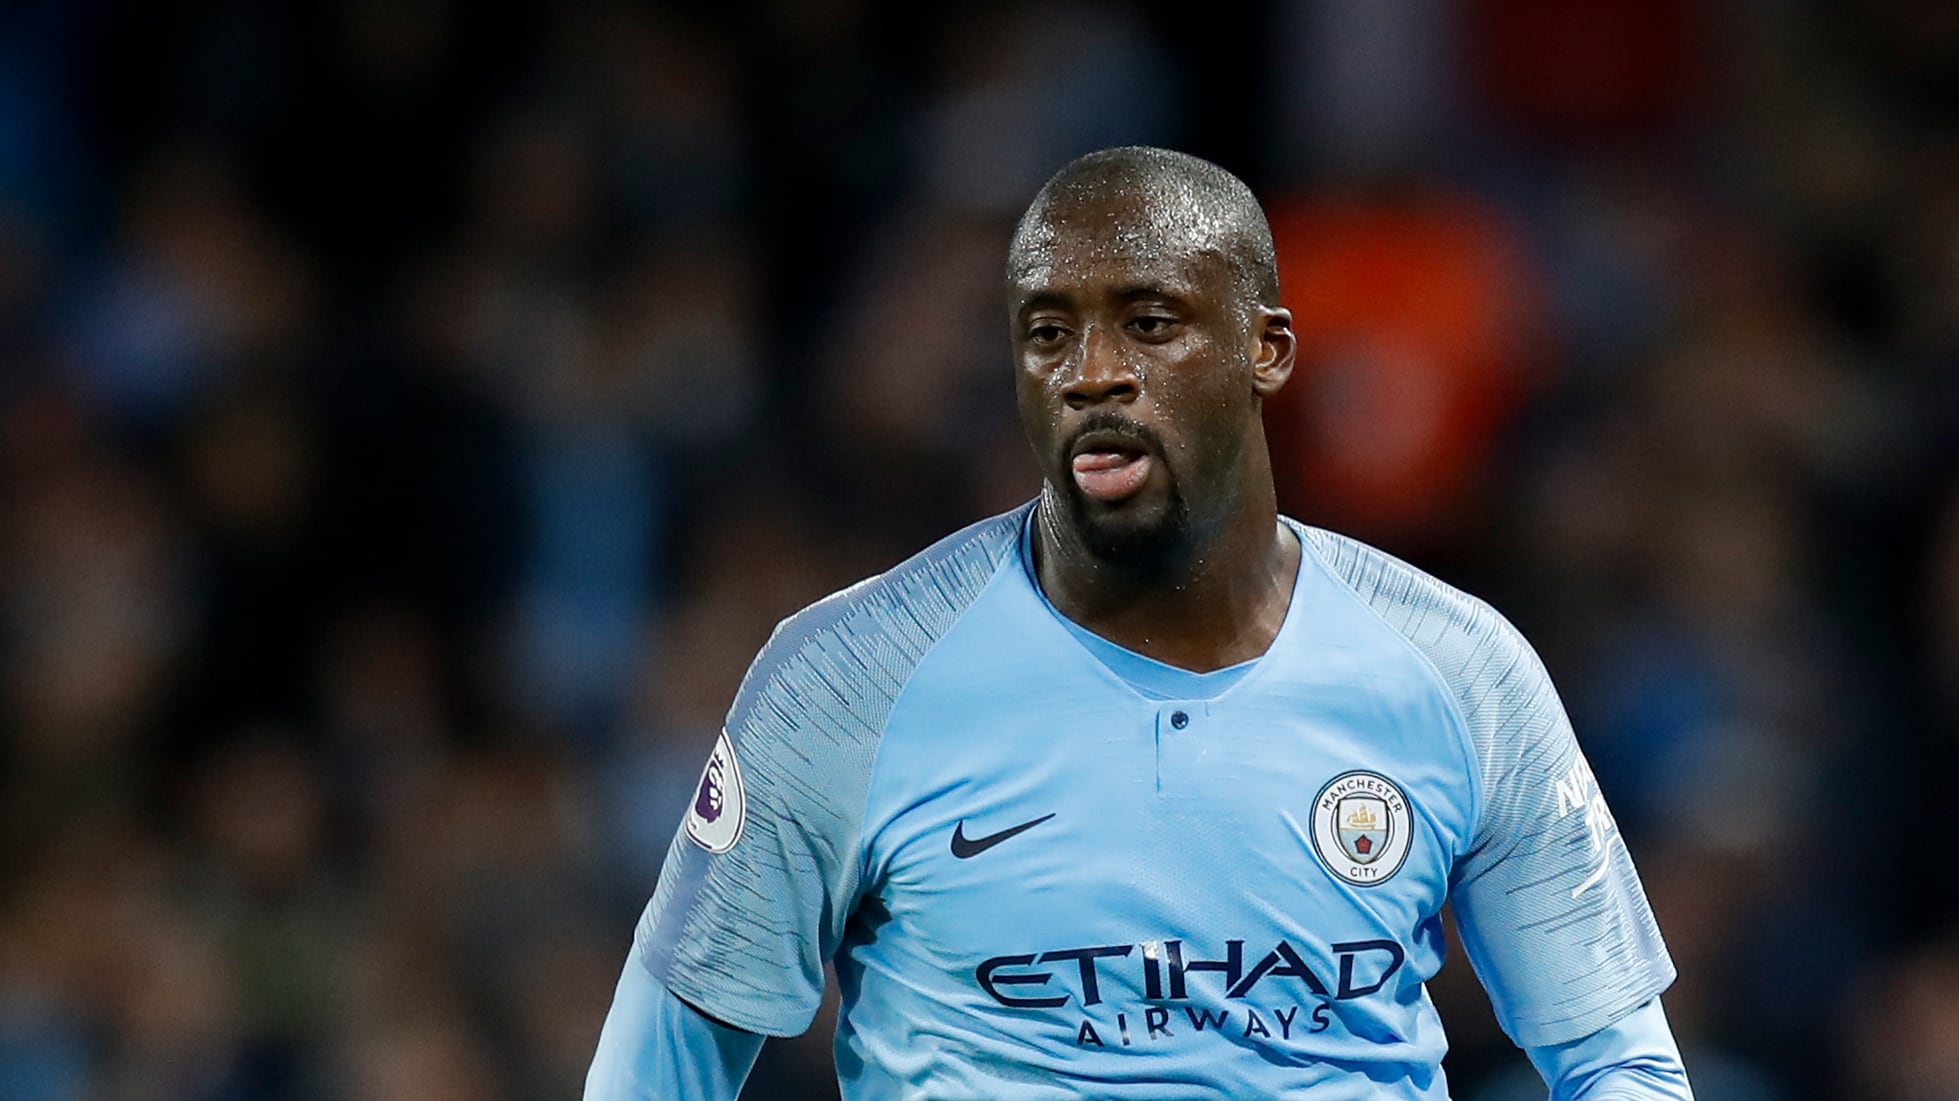 Yaya Toure joined Manchester City in the summer of 2010